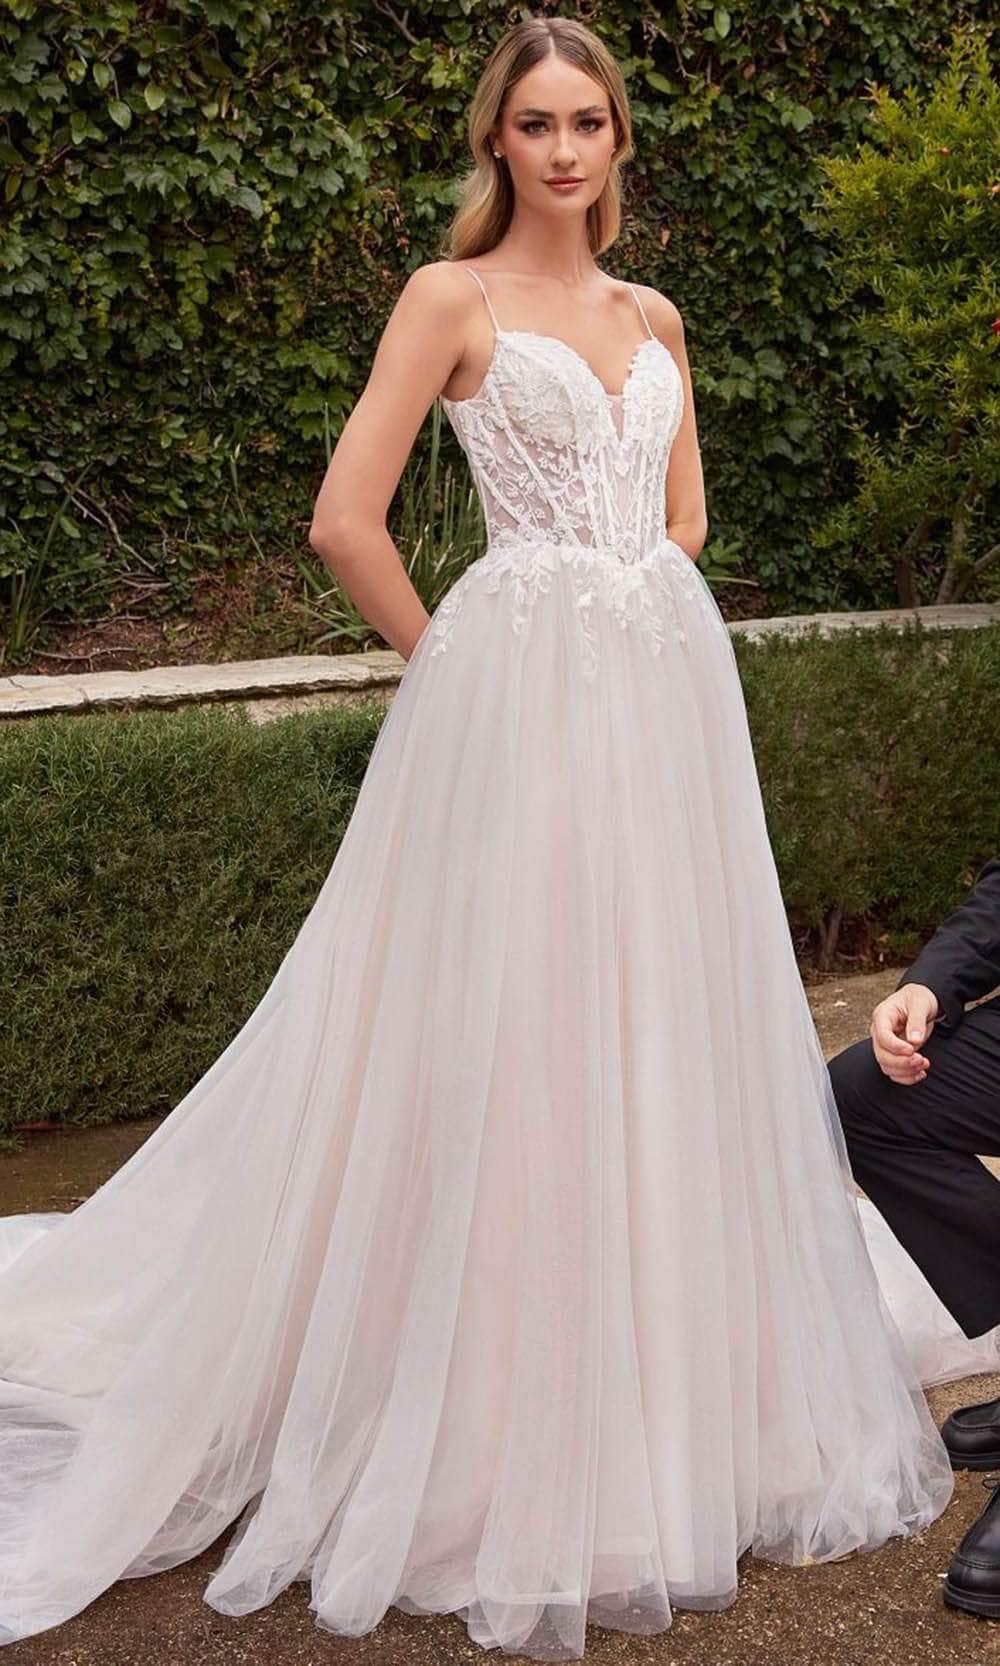 Image of Ladivine CD854W - Lace Applique Embellished Sleeveless Bridal Gown